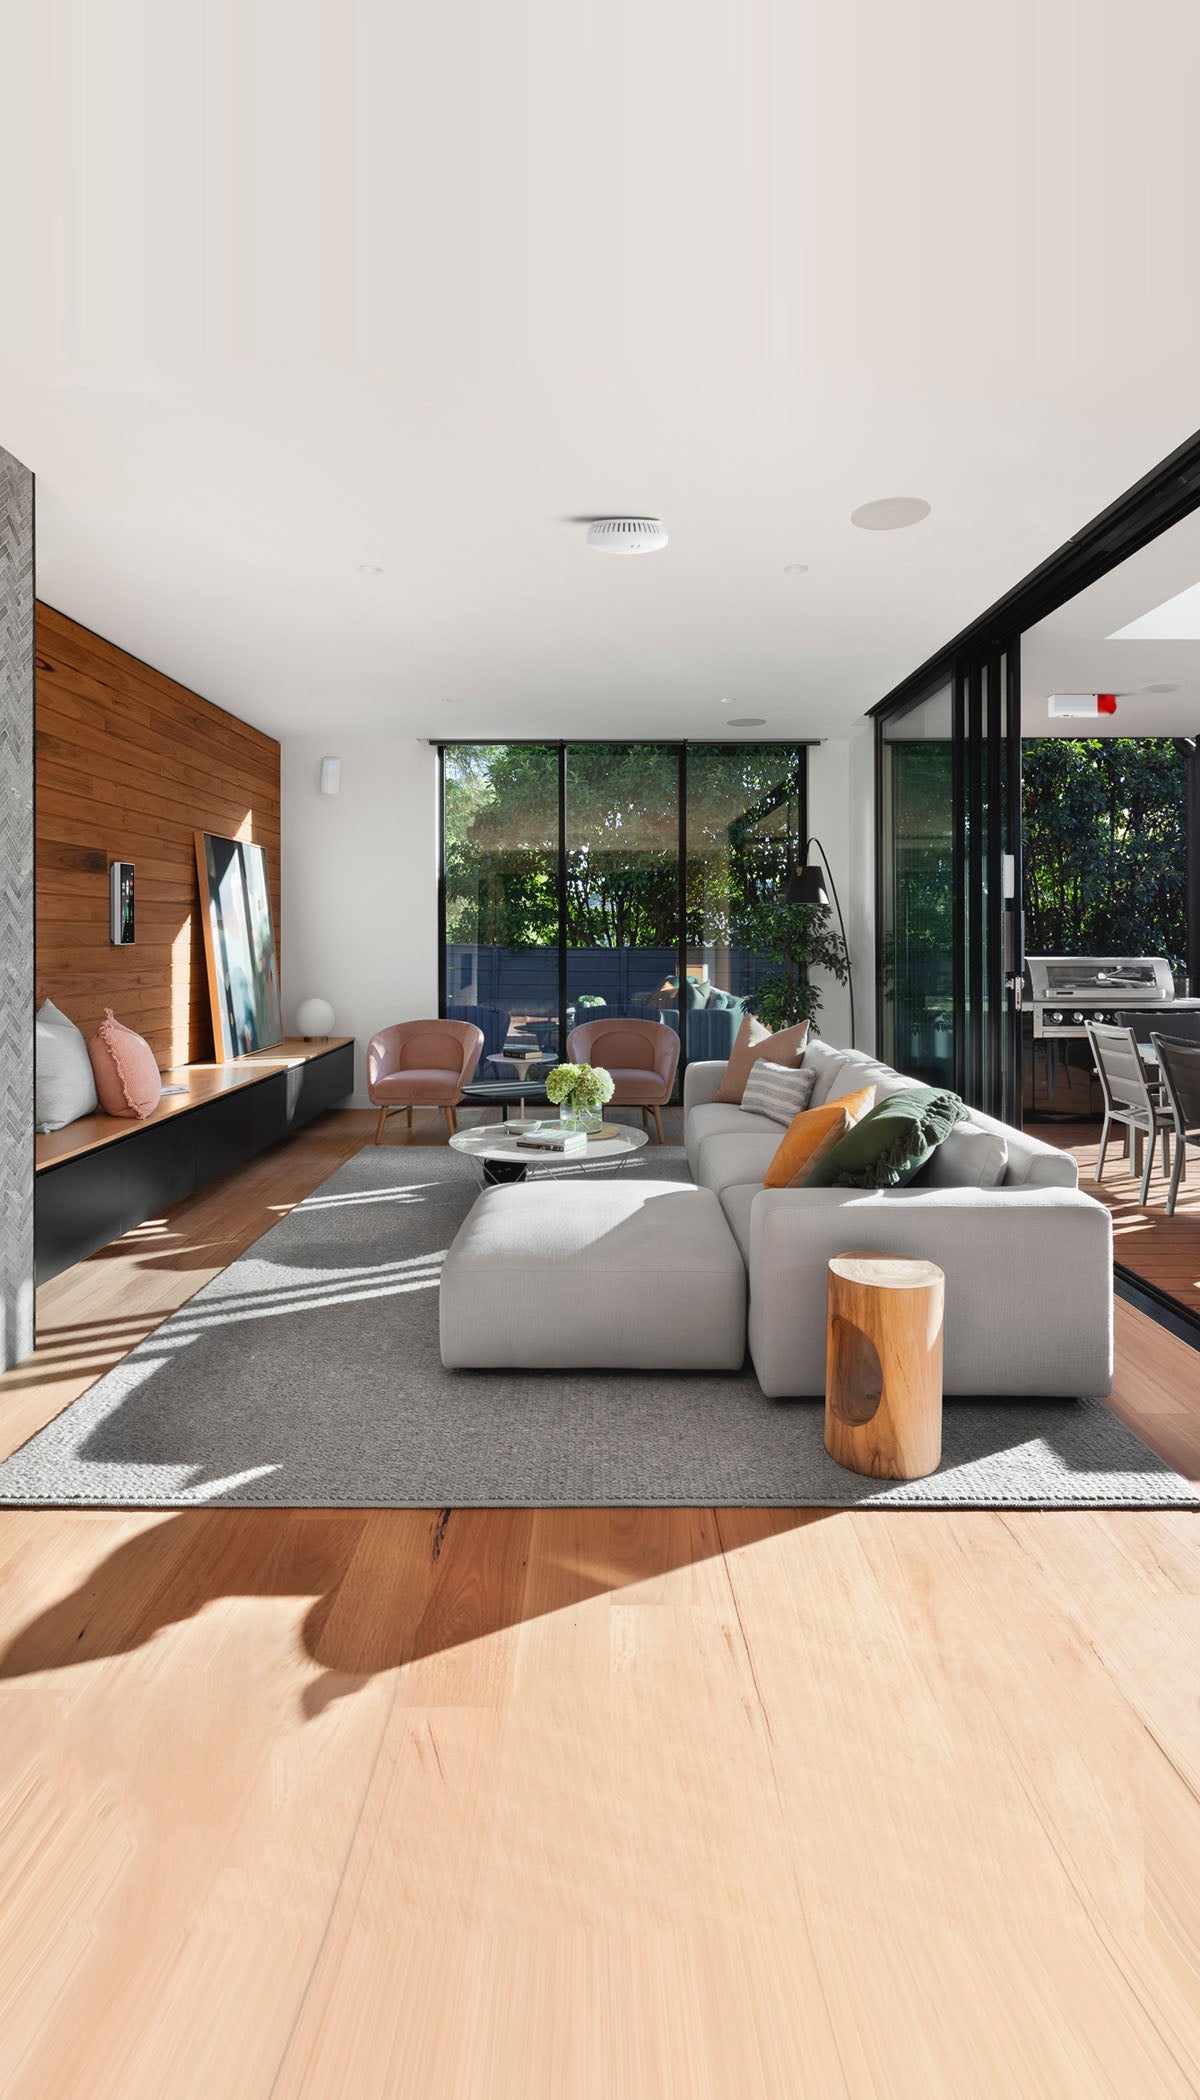 Interior shot of parkdale house Balwyn by R Architecture showing elegant living room with large grey sofa on wooden floor